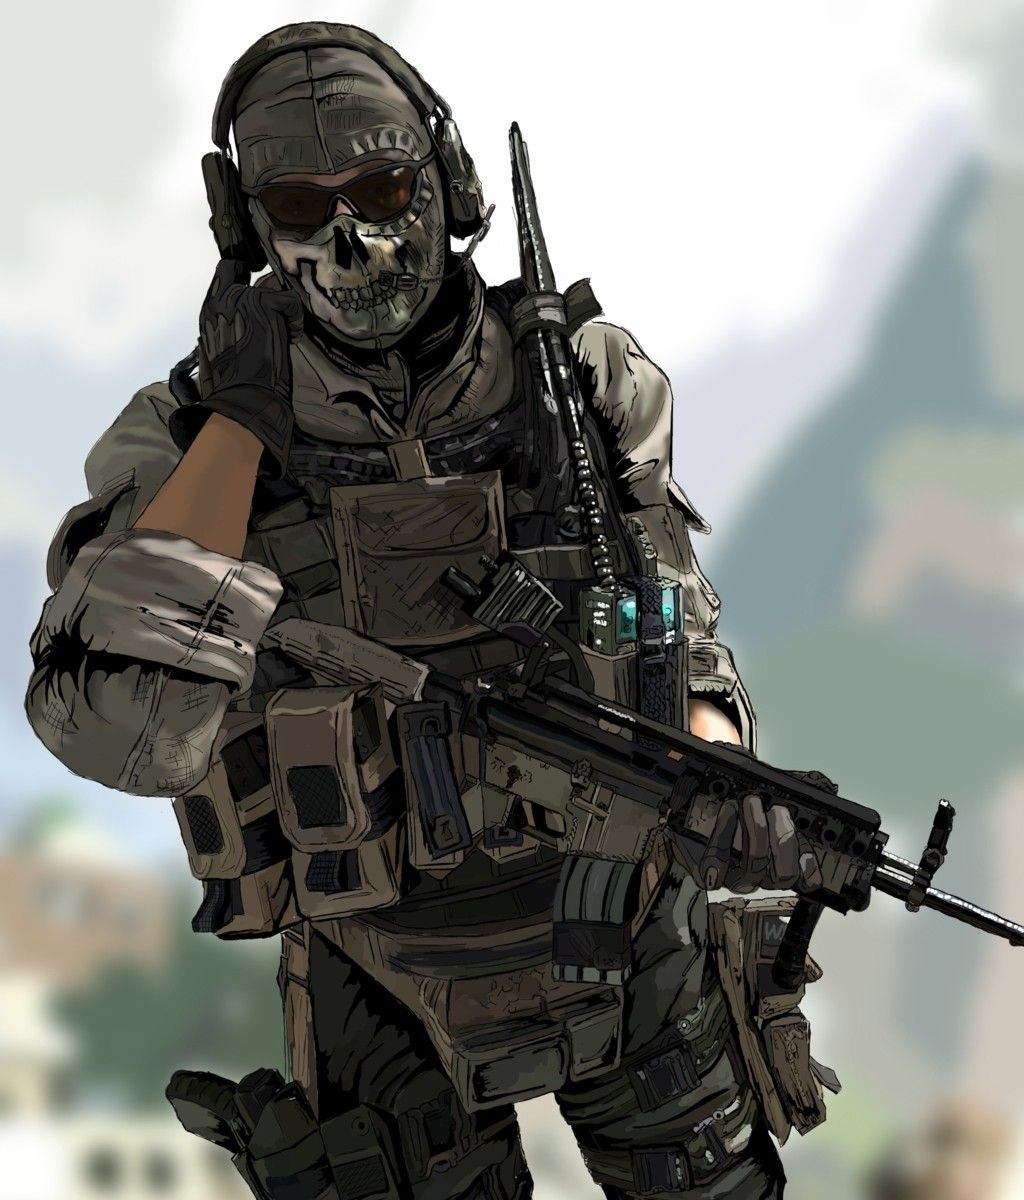 Simon Ghost Riley. Call of duty, Call of duty ghosts, Military